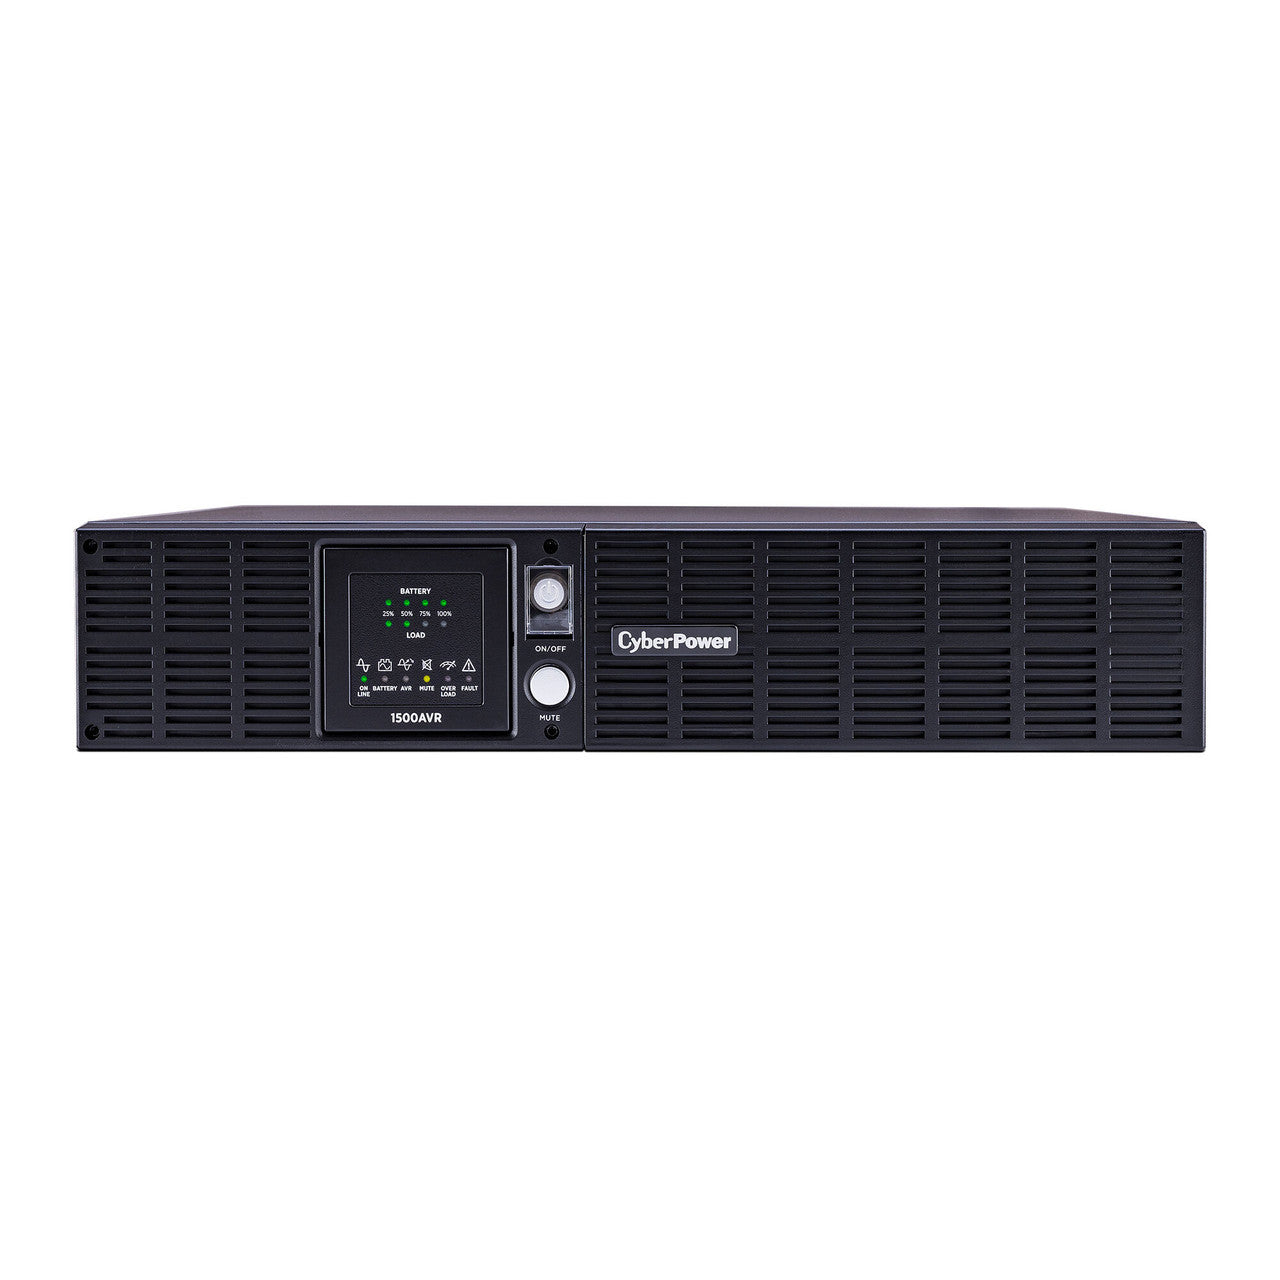 CyberPower CPS1500AVR CyberPower 1500VA/900W Line-Interactive Rackmount UPS 8 Outlets